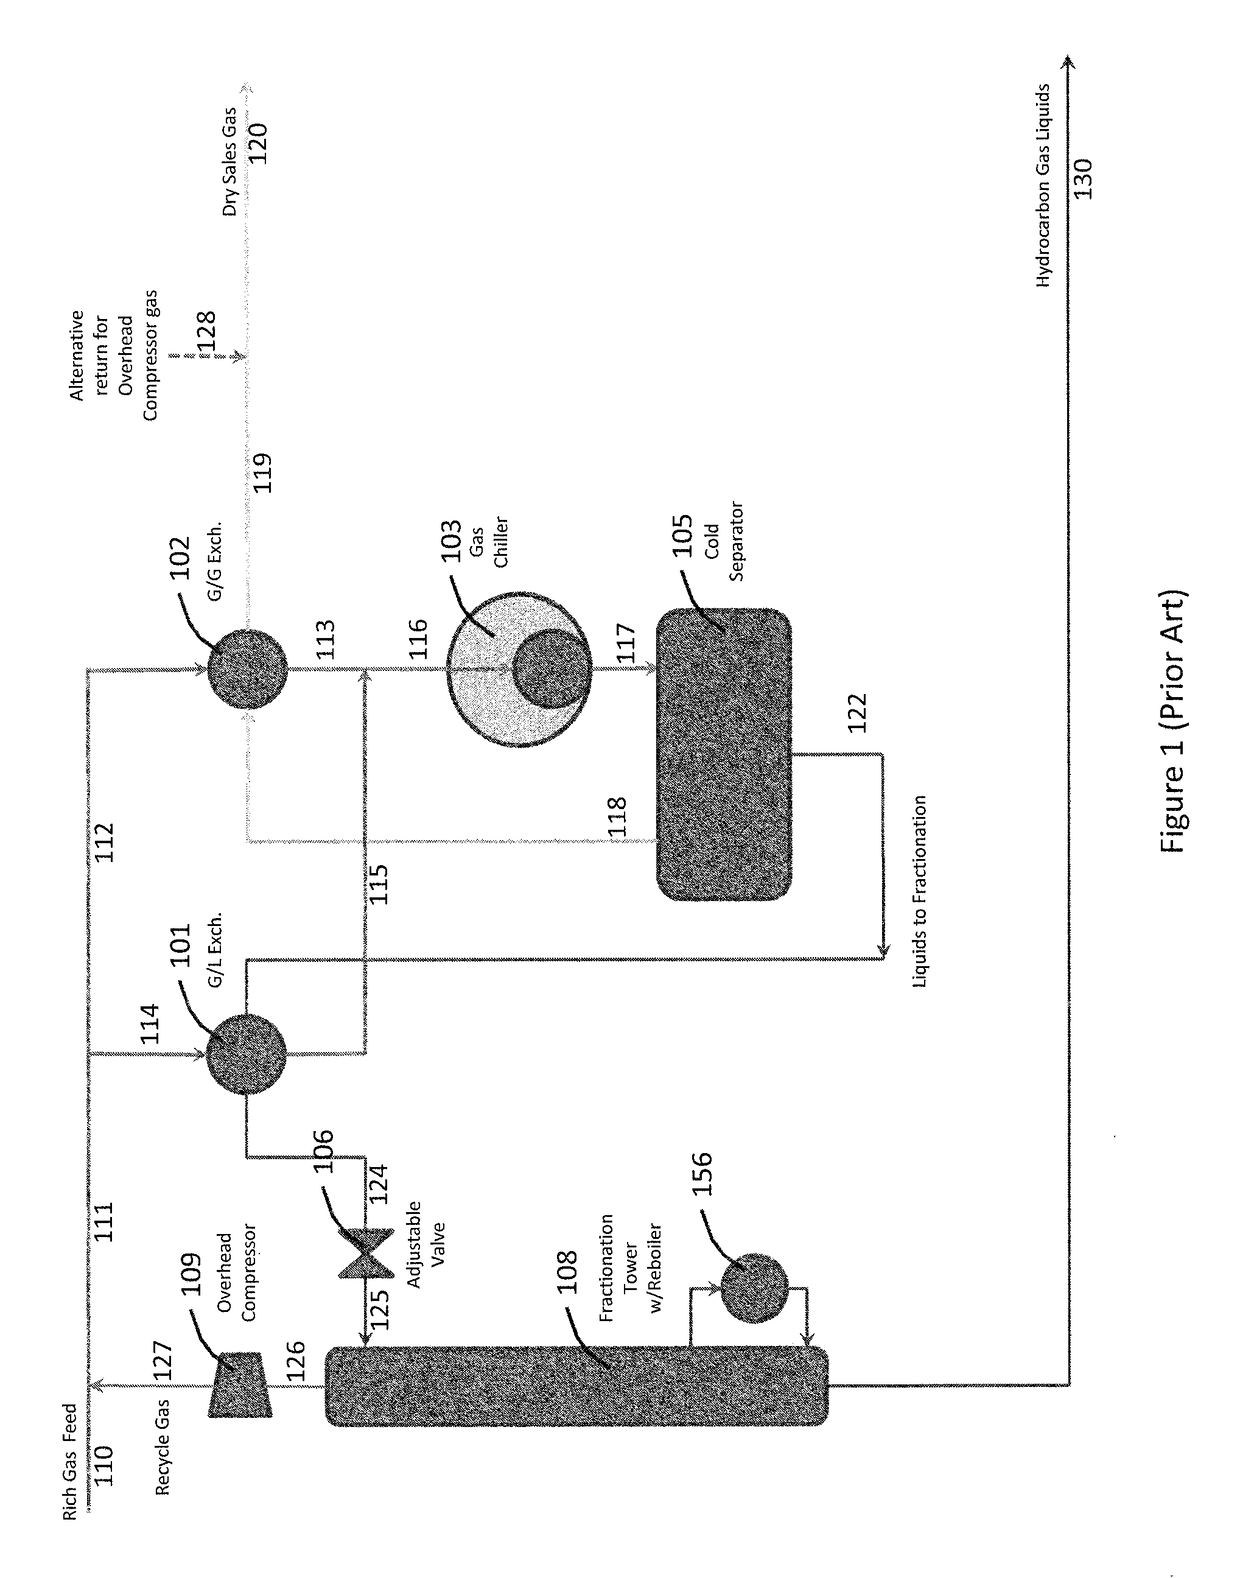 Process and apparatus for processing a hydrocarbon gas stream